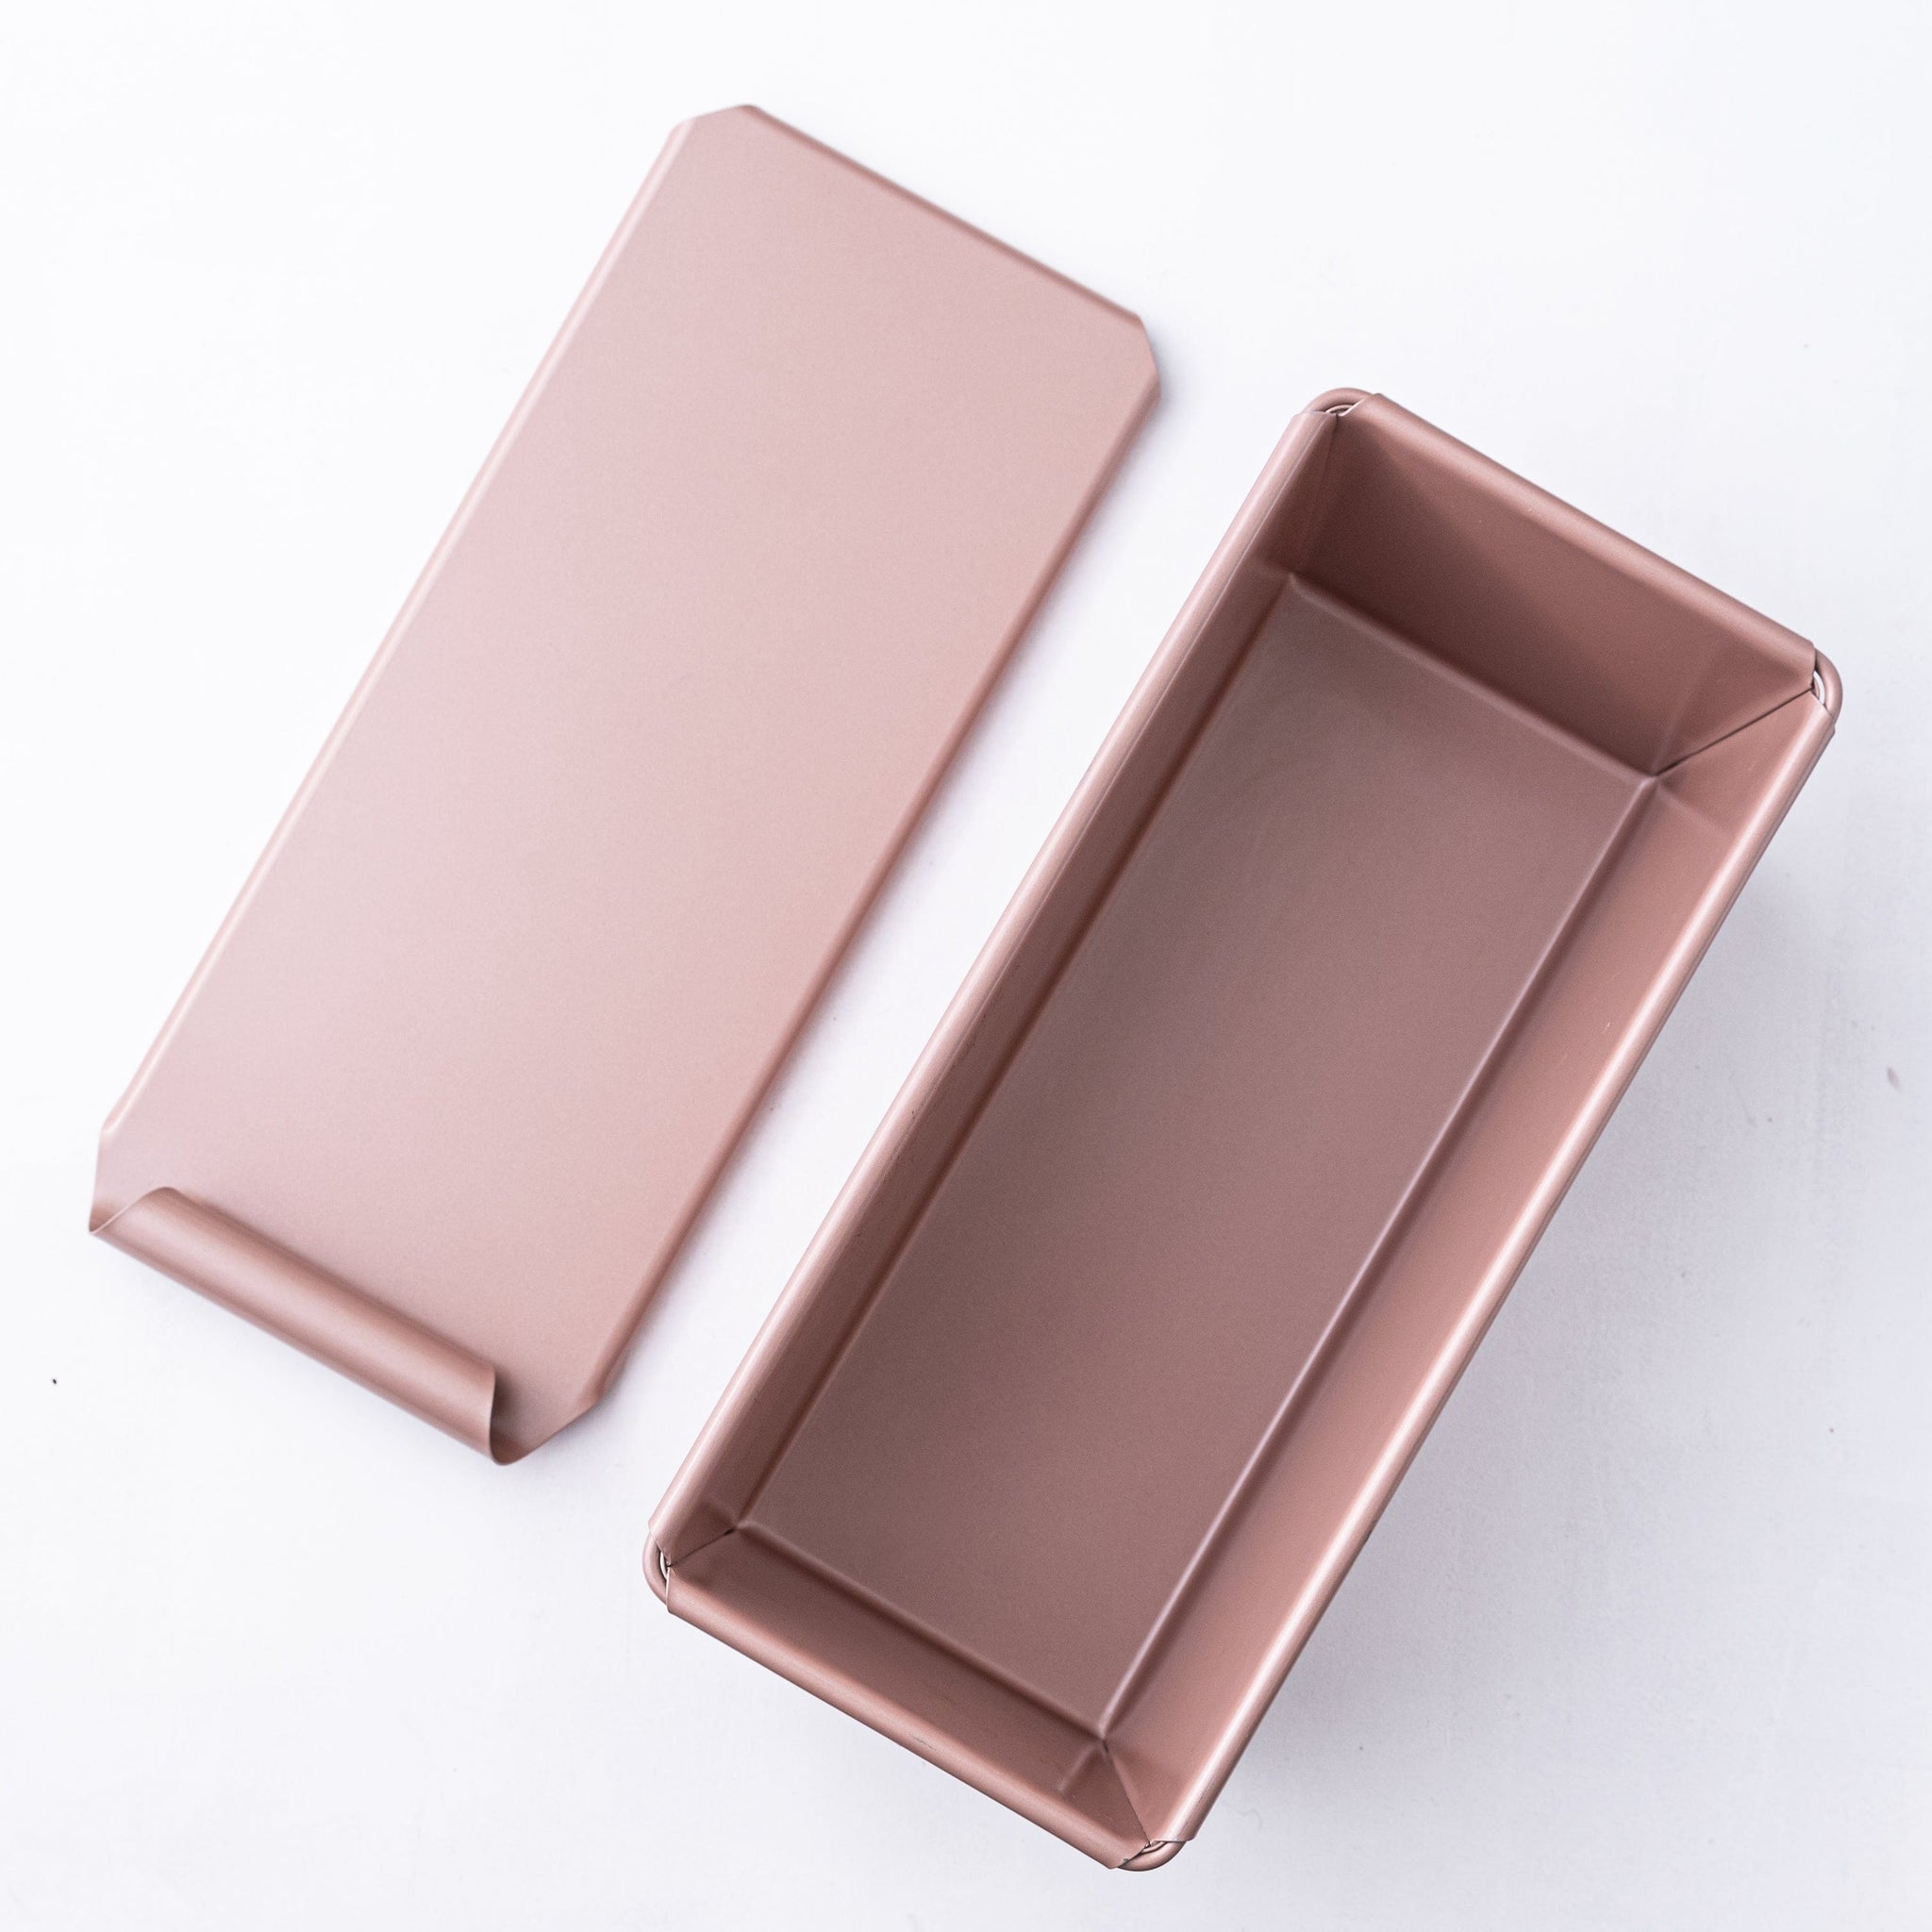 TheMix Shop Bakeware Rose Gold Bread Tin with Lid